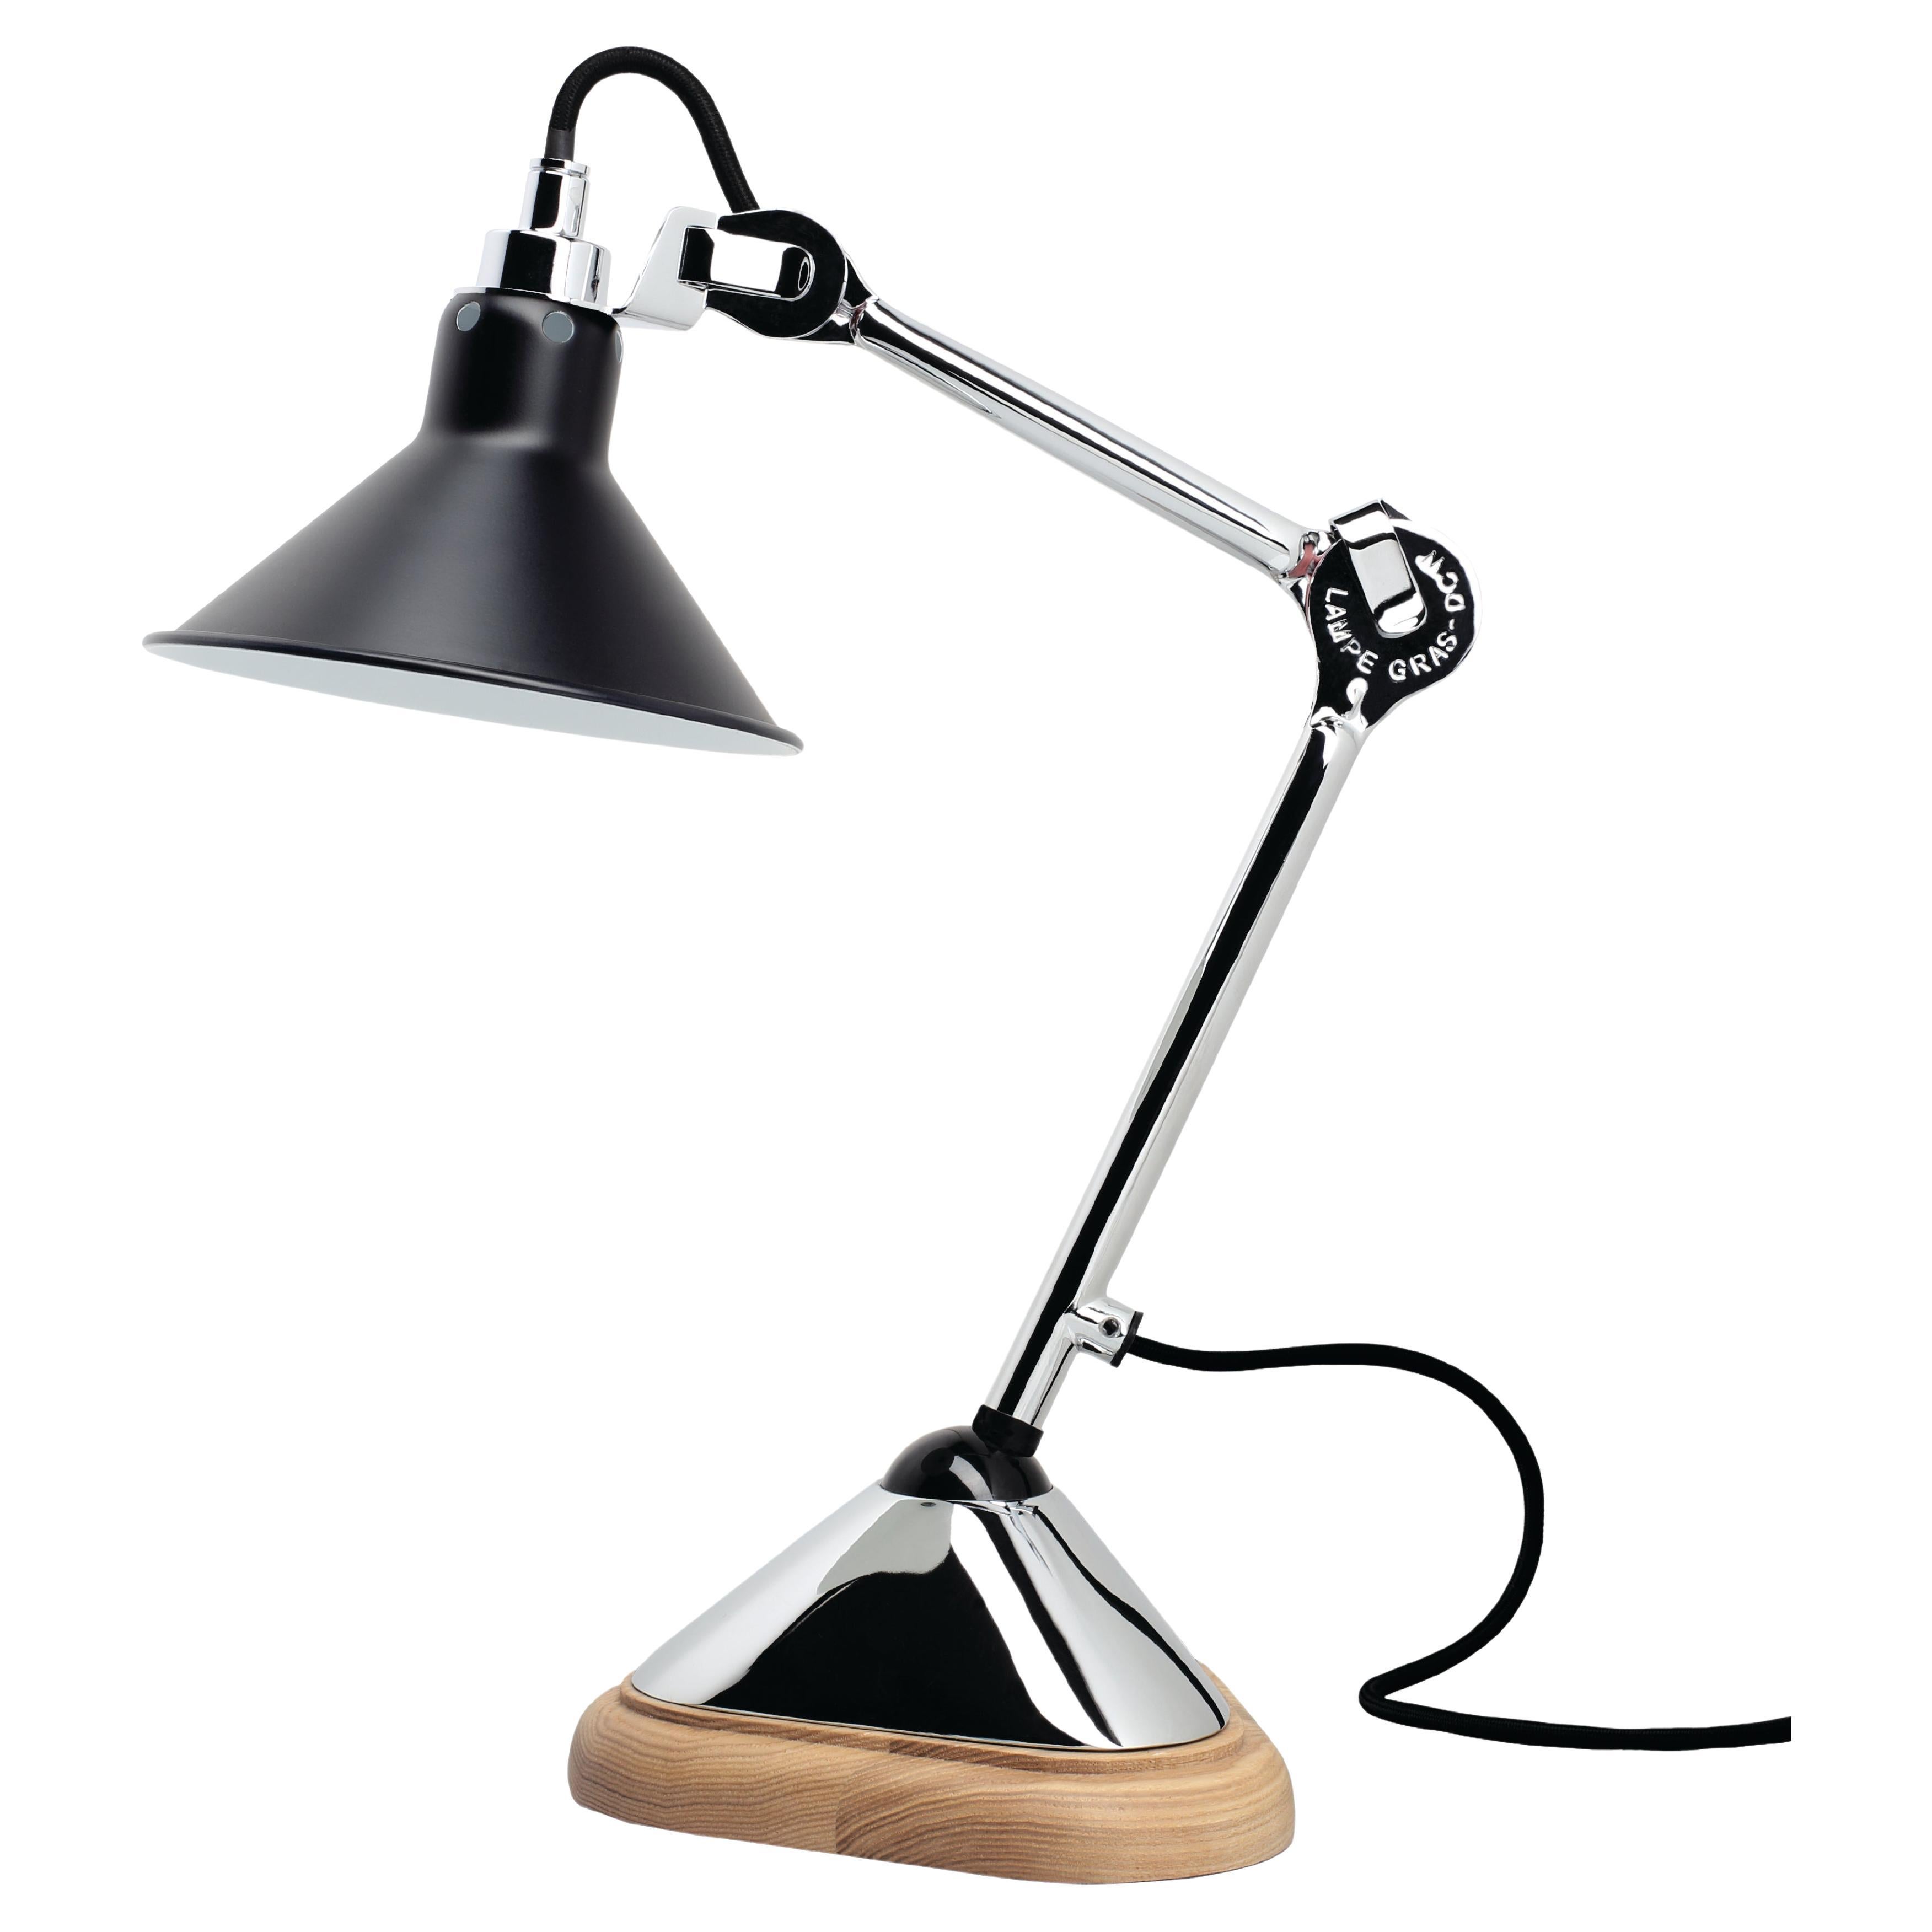 DCW Editions La Lampe Gras N°207 Conic Table Lamp in Chrome Arm with Black Shade For Sale